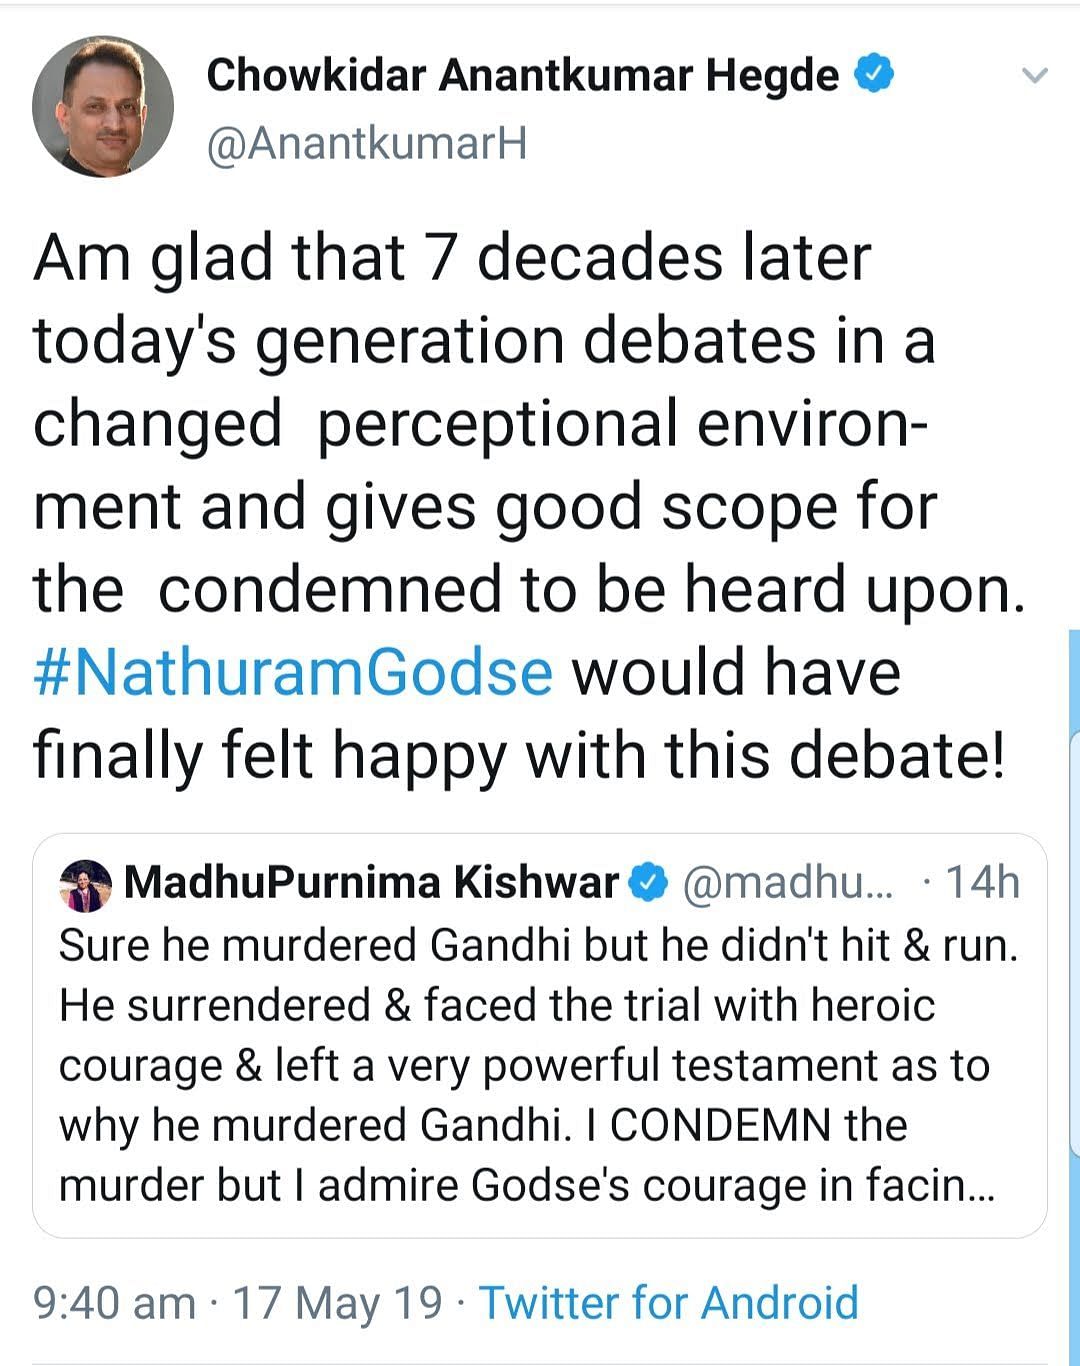 He claimed his account was hacked and said “can be no sympathy or justification of Gandhi ji’s murder.”